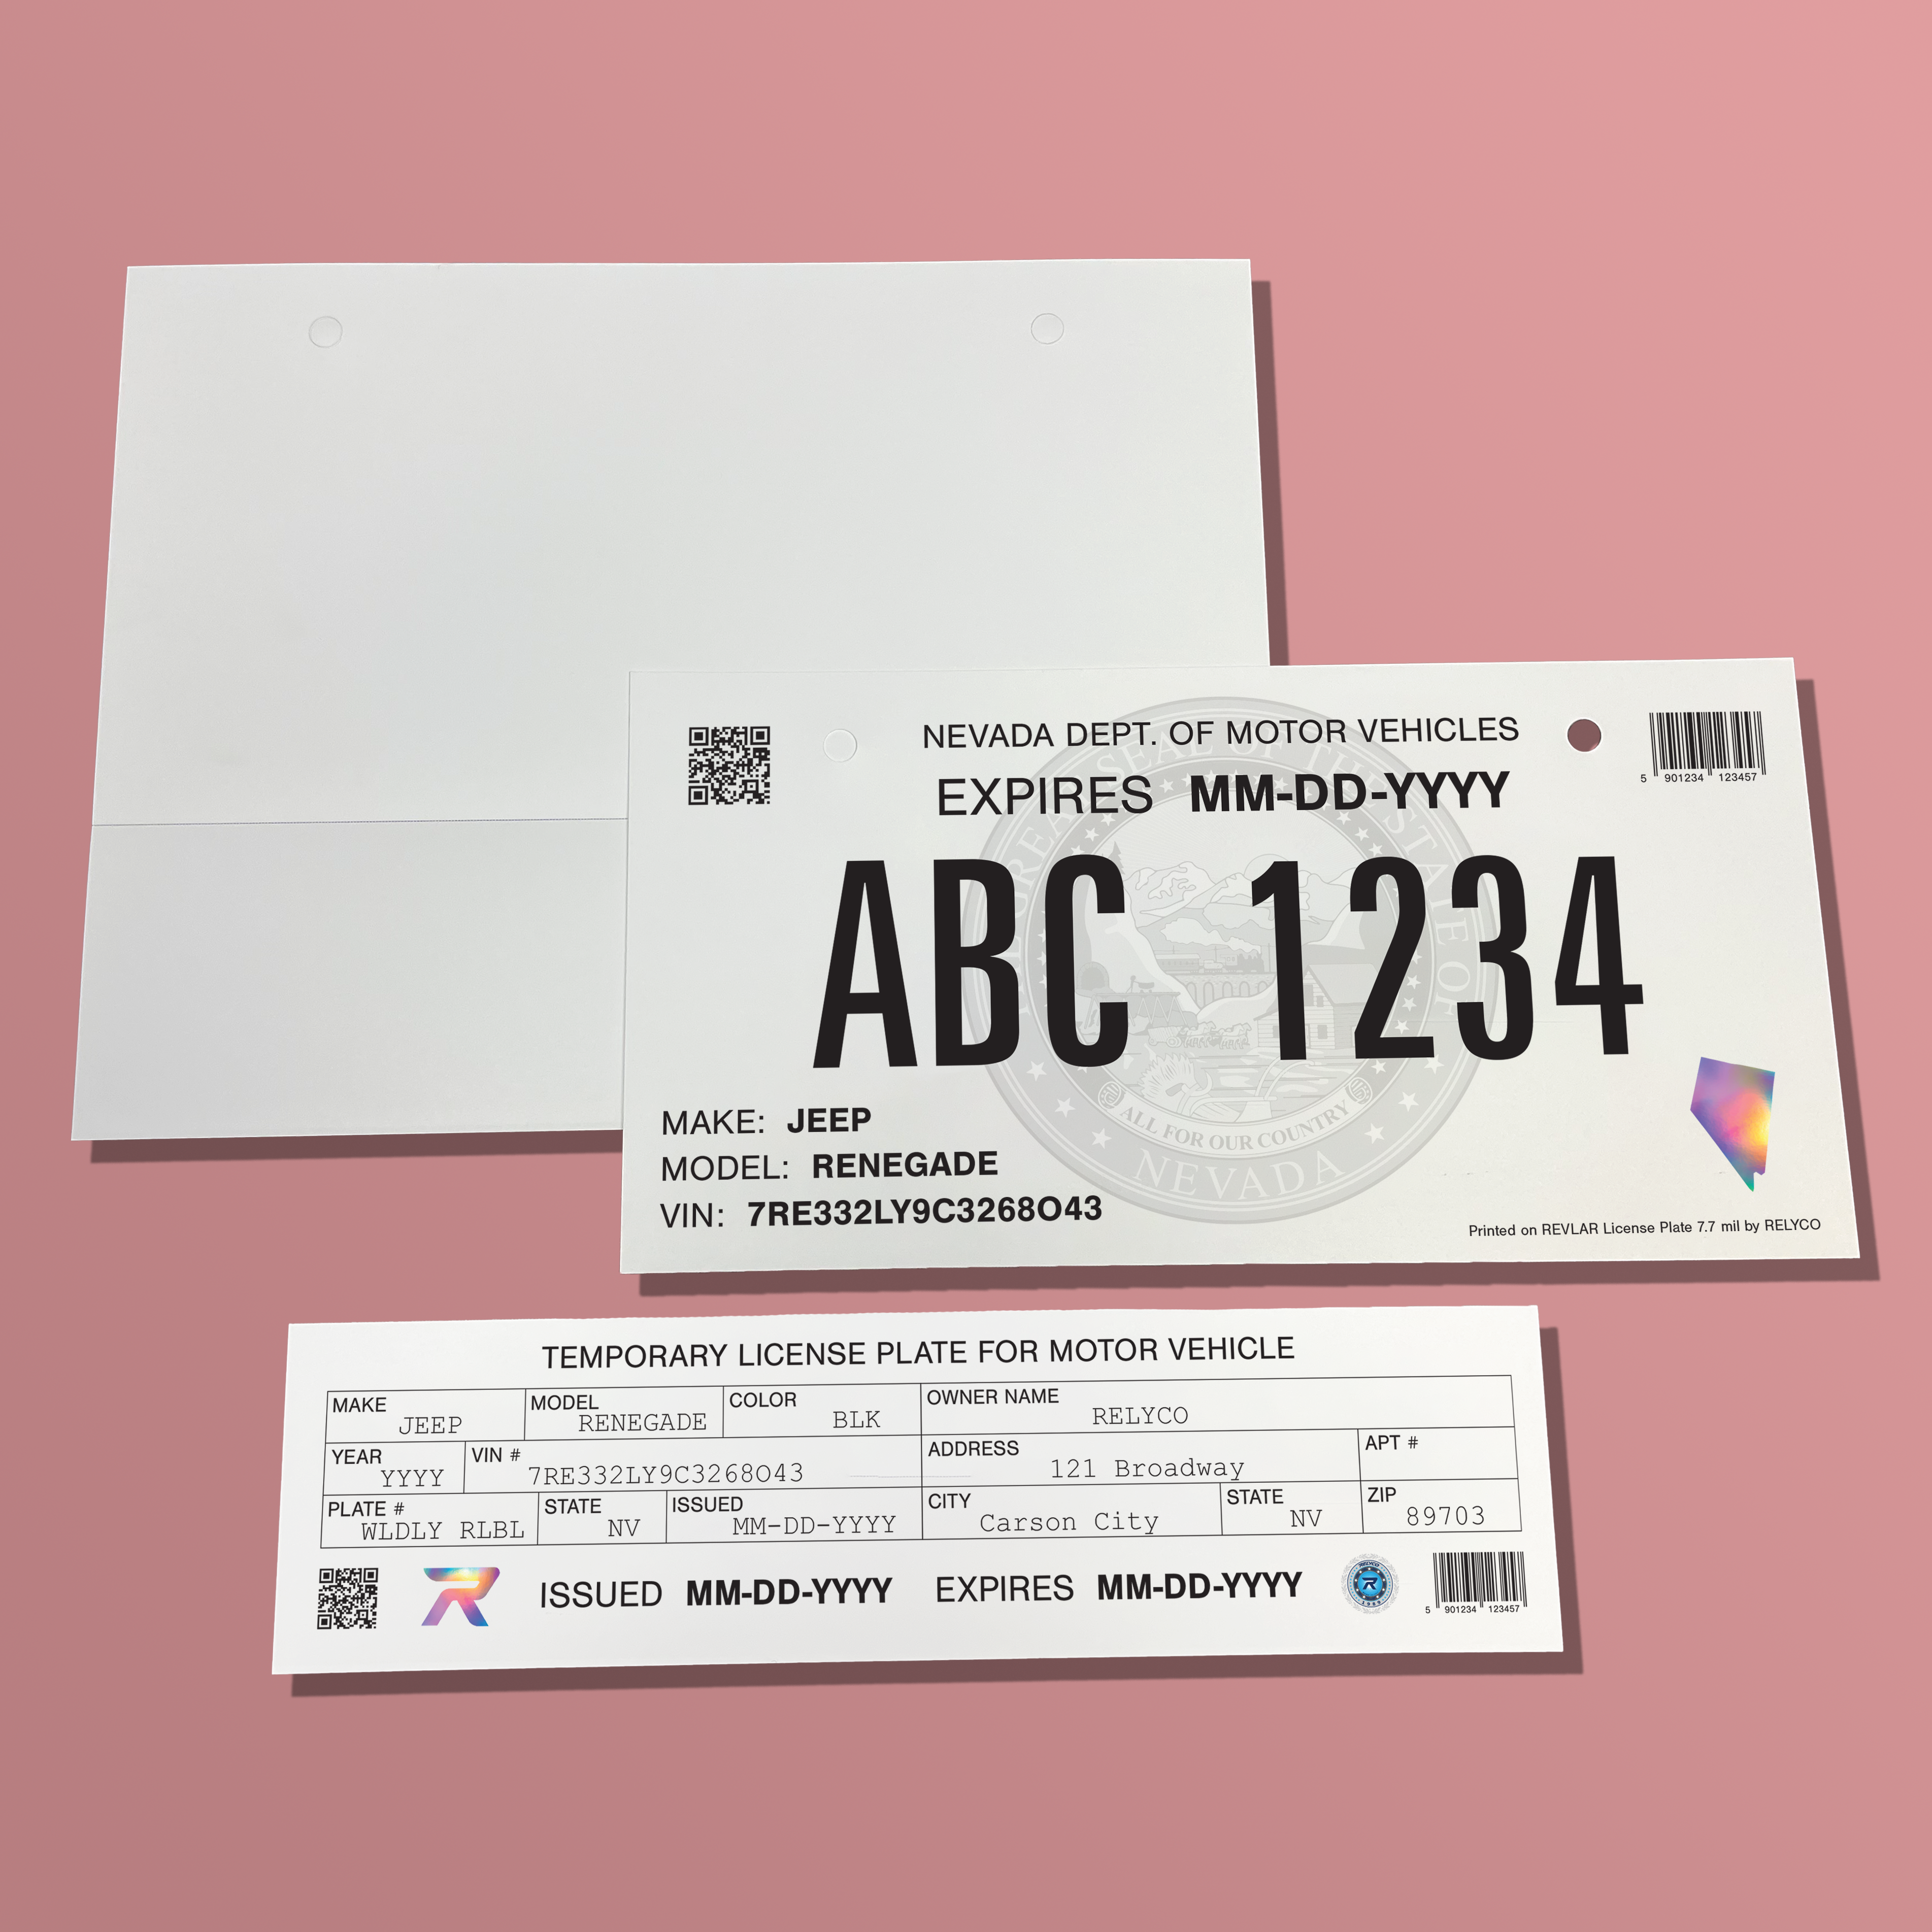 REVLAR® Temporary License Plate - Laser Printer Only with Tear-Out Record (100 sheets)